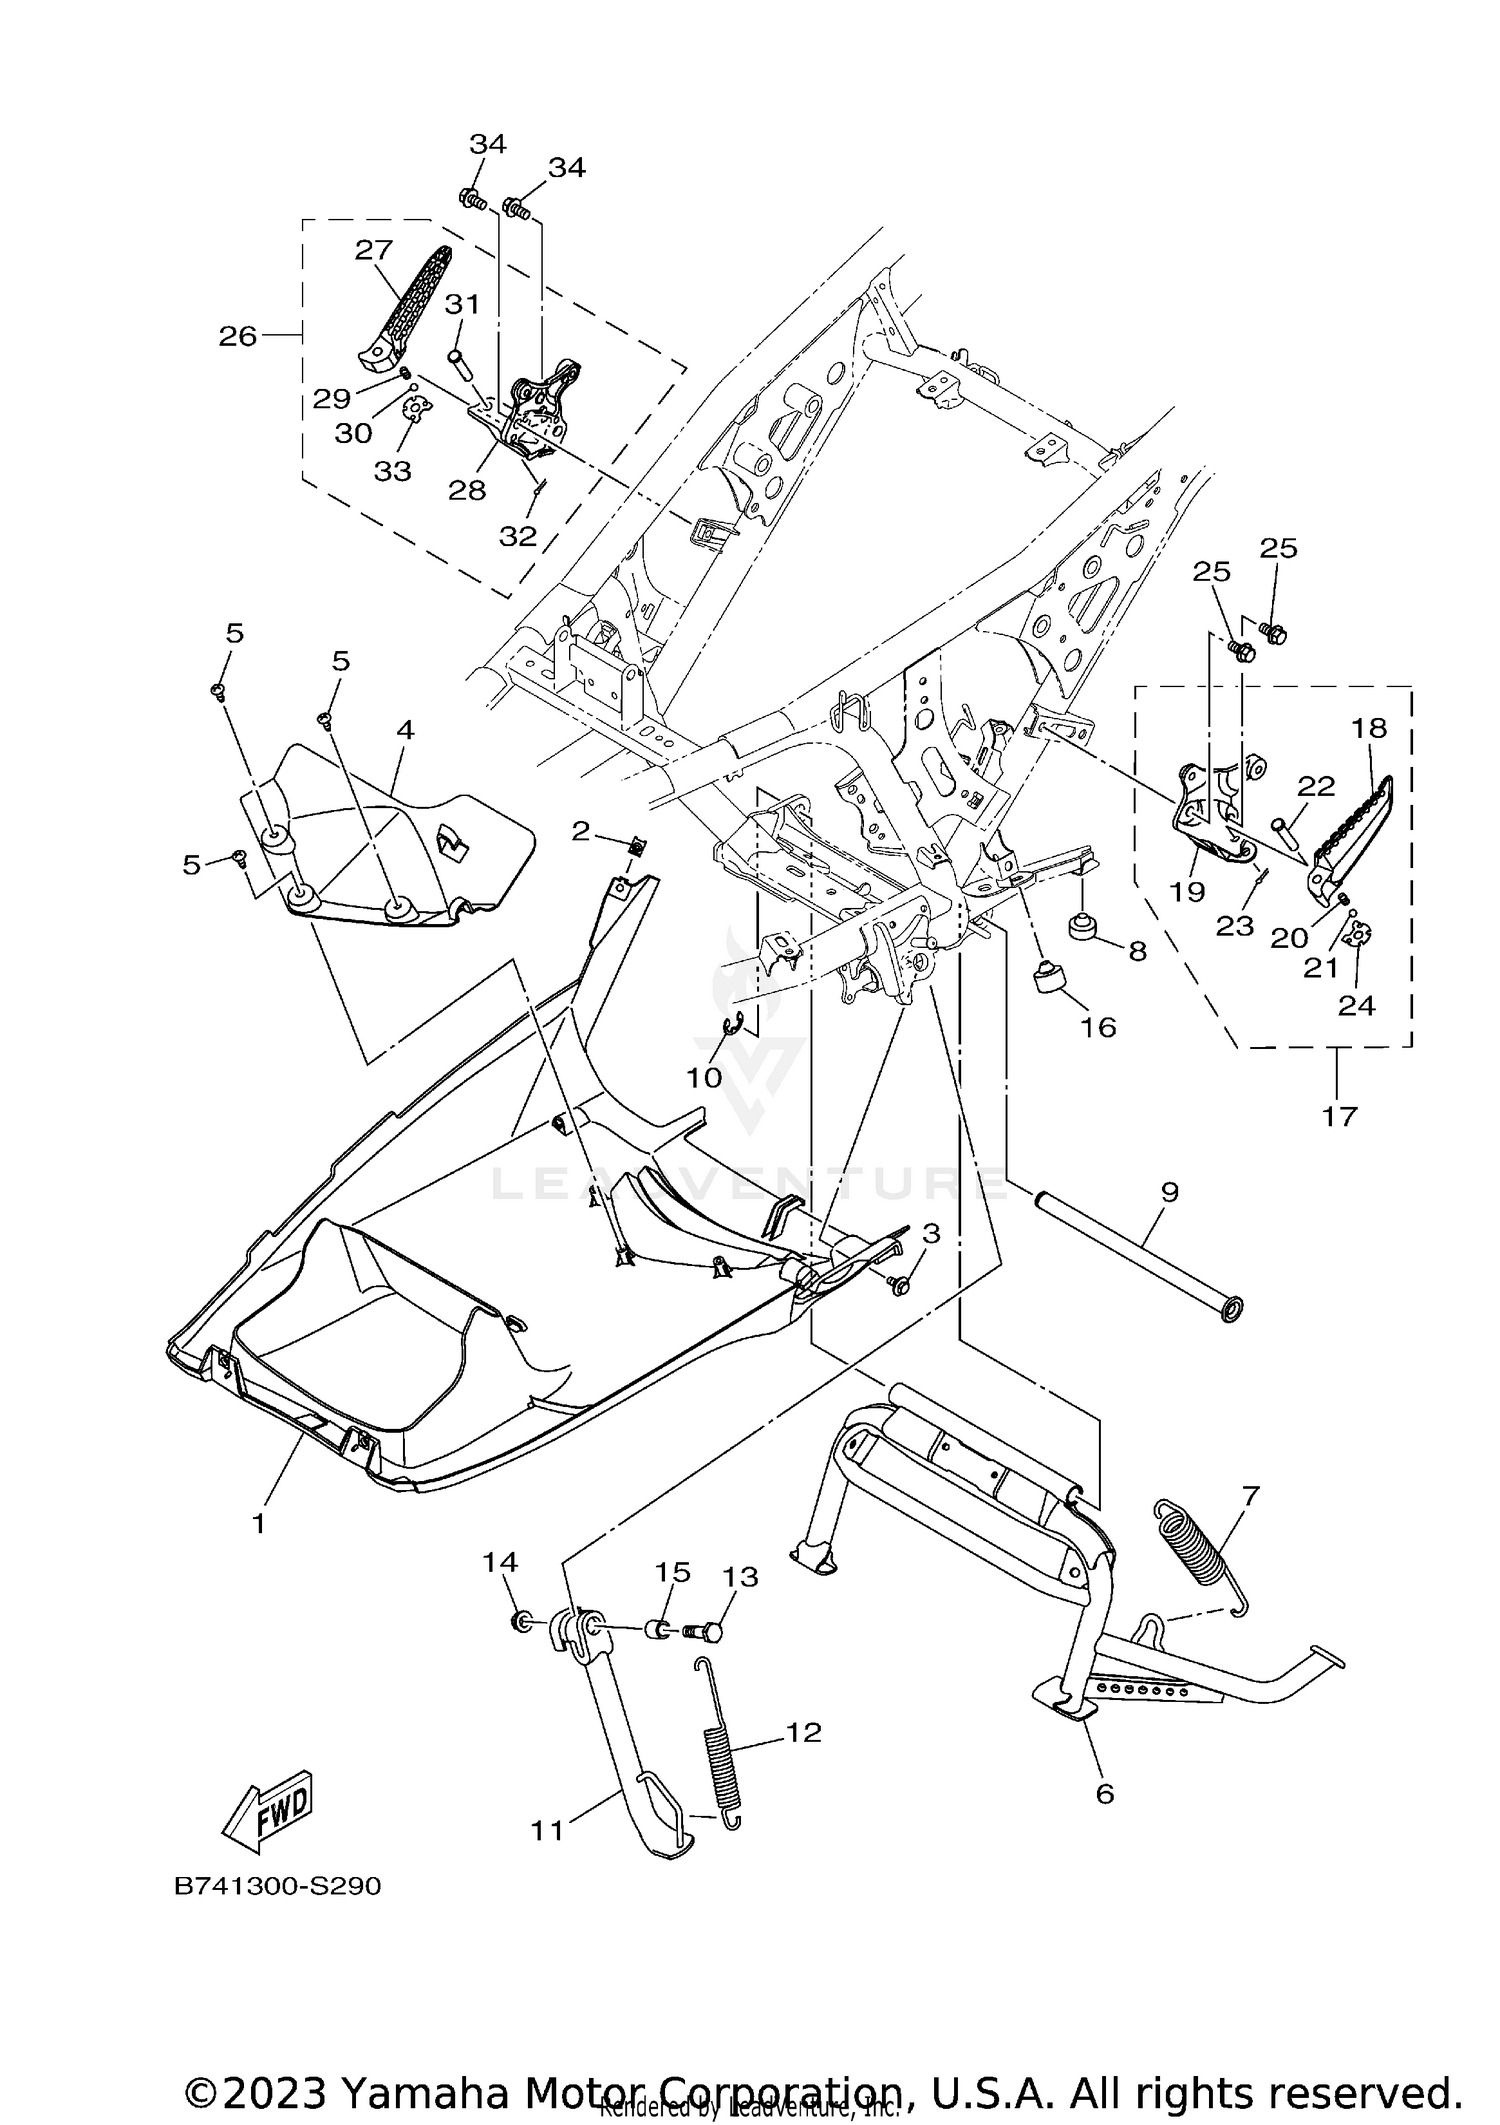 Part number: B74-F8385-00-00